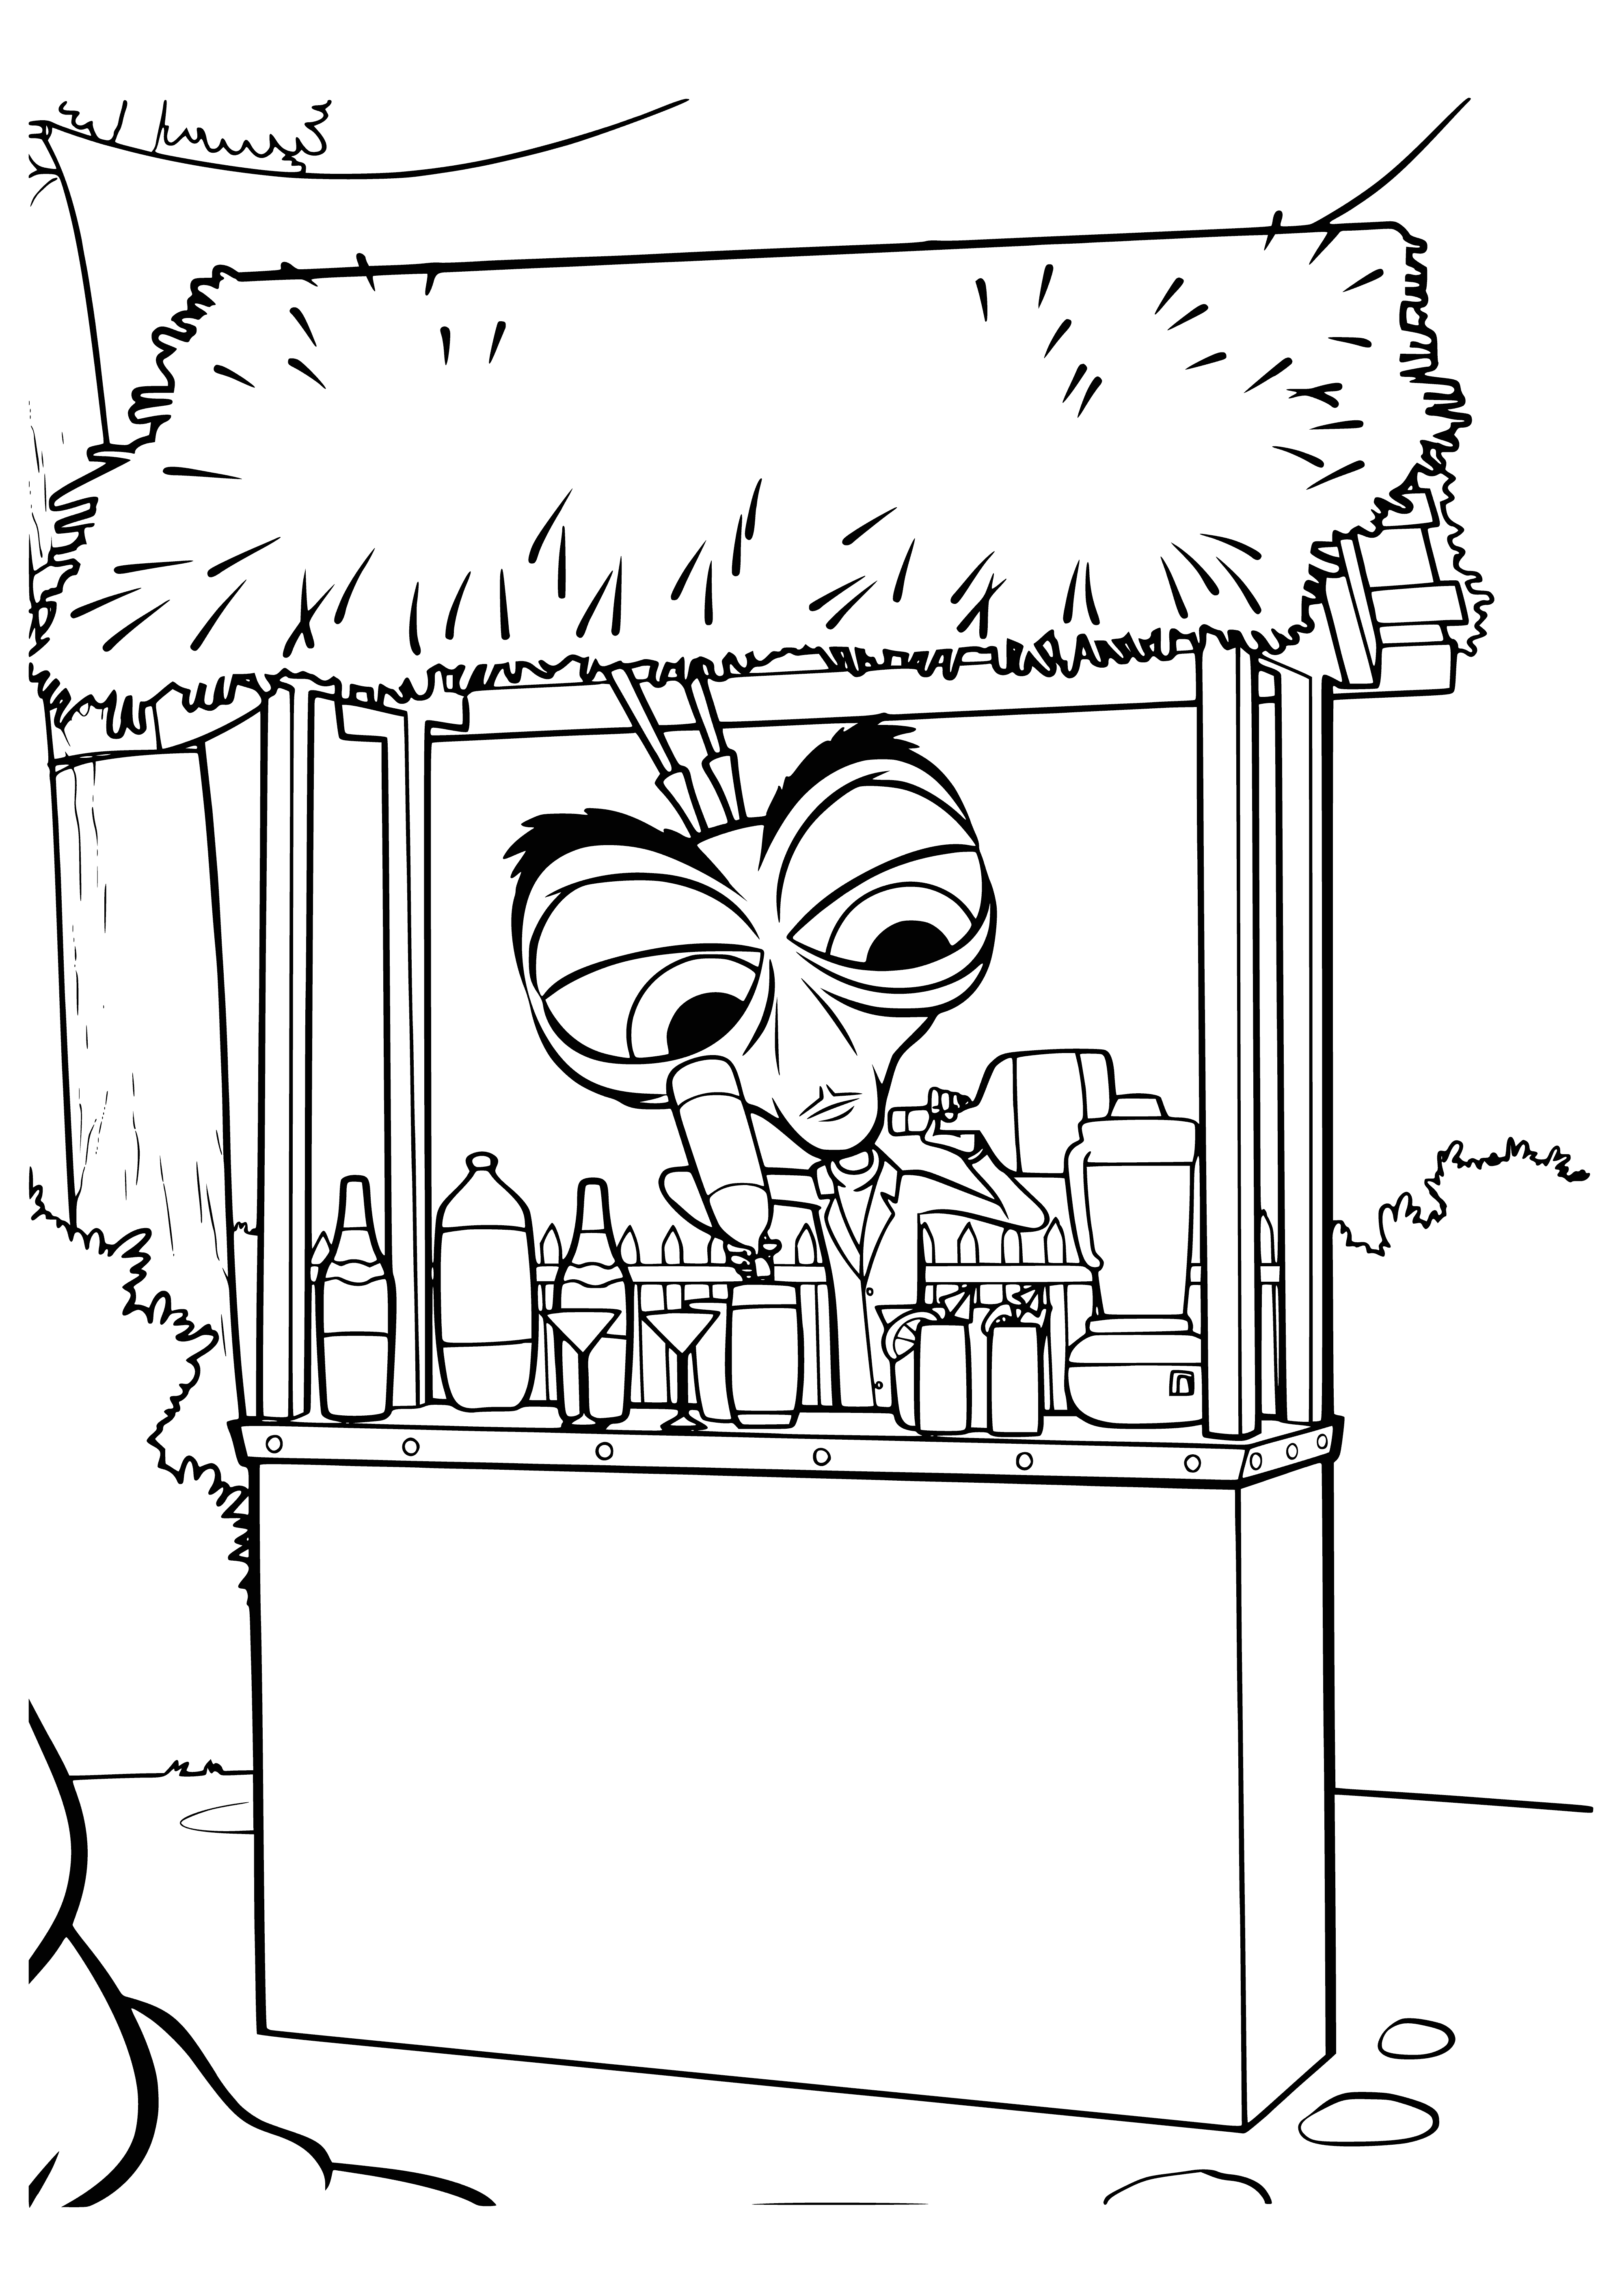 coloring page: Dr. Tarakan from Monsters vs Aliens is a tall, green, alien doctor with 4 arms, 4 eyes, a white lab coat & a long purple tongue. #ColoringPages